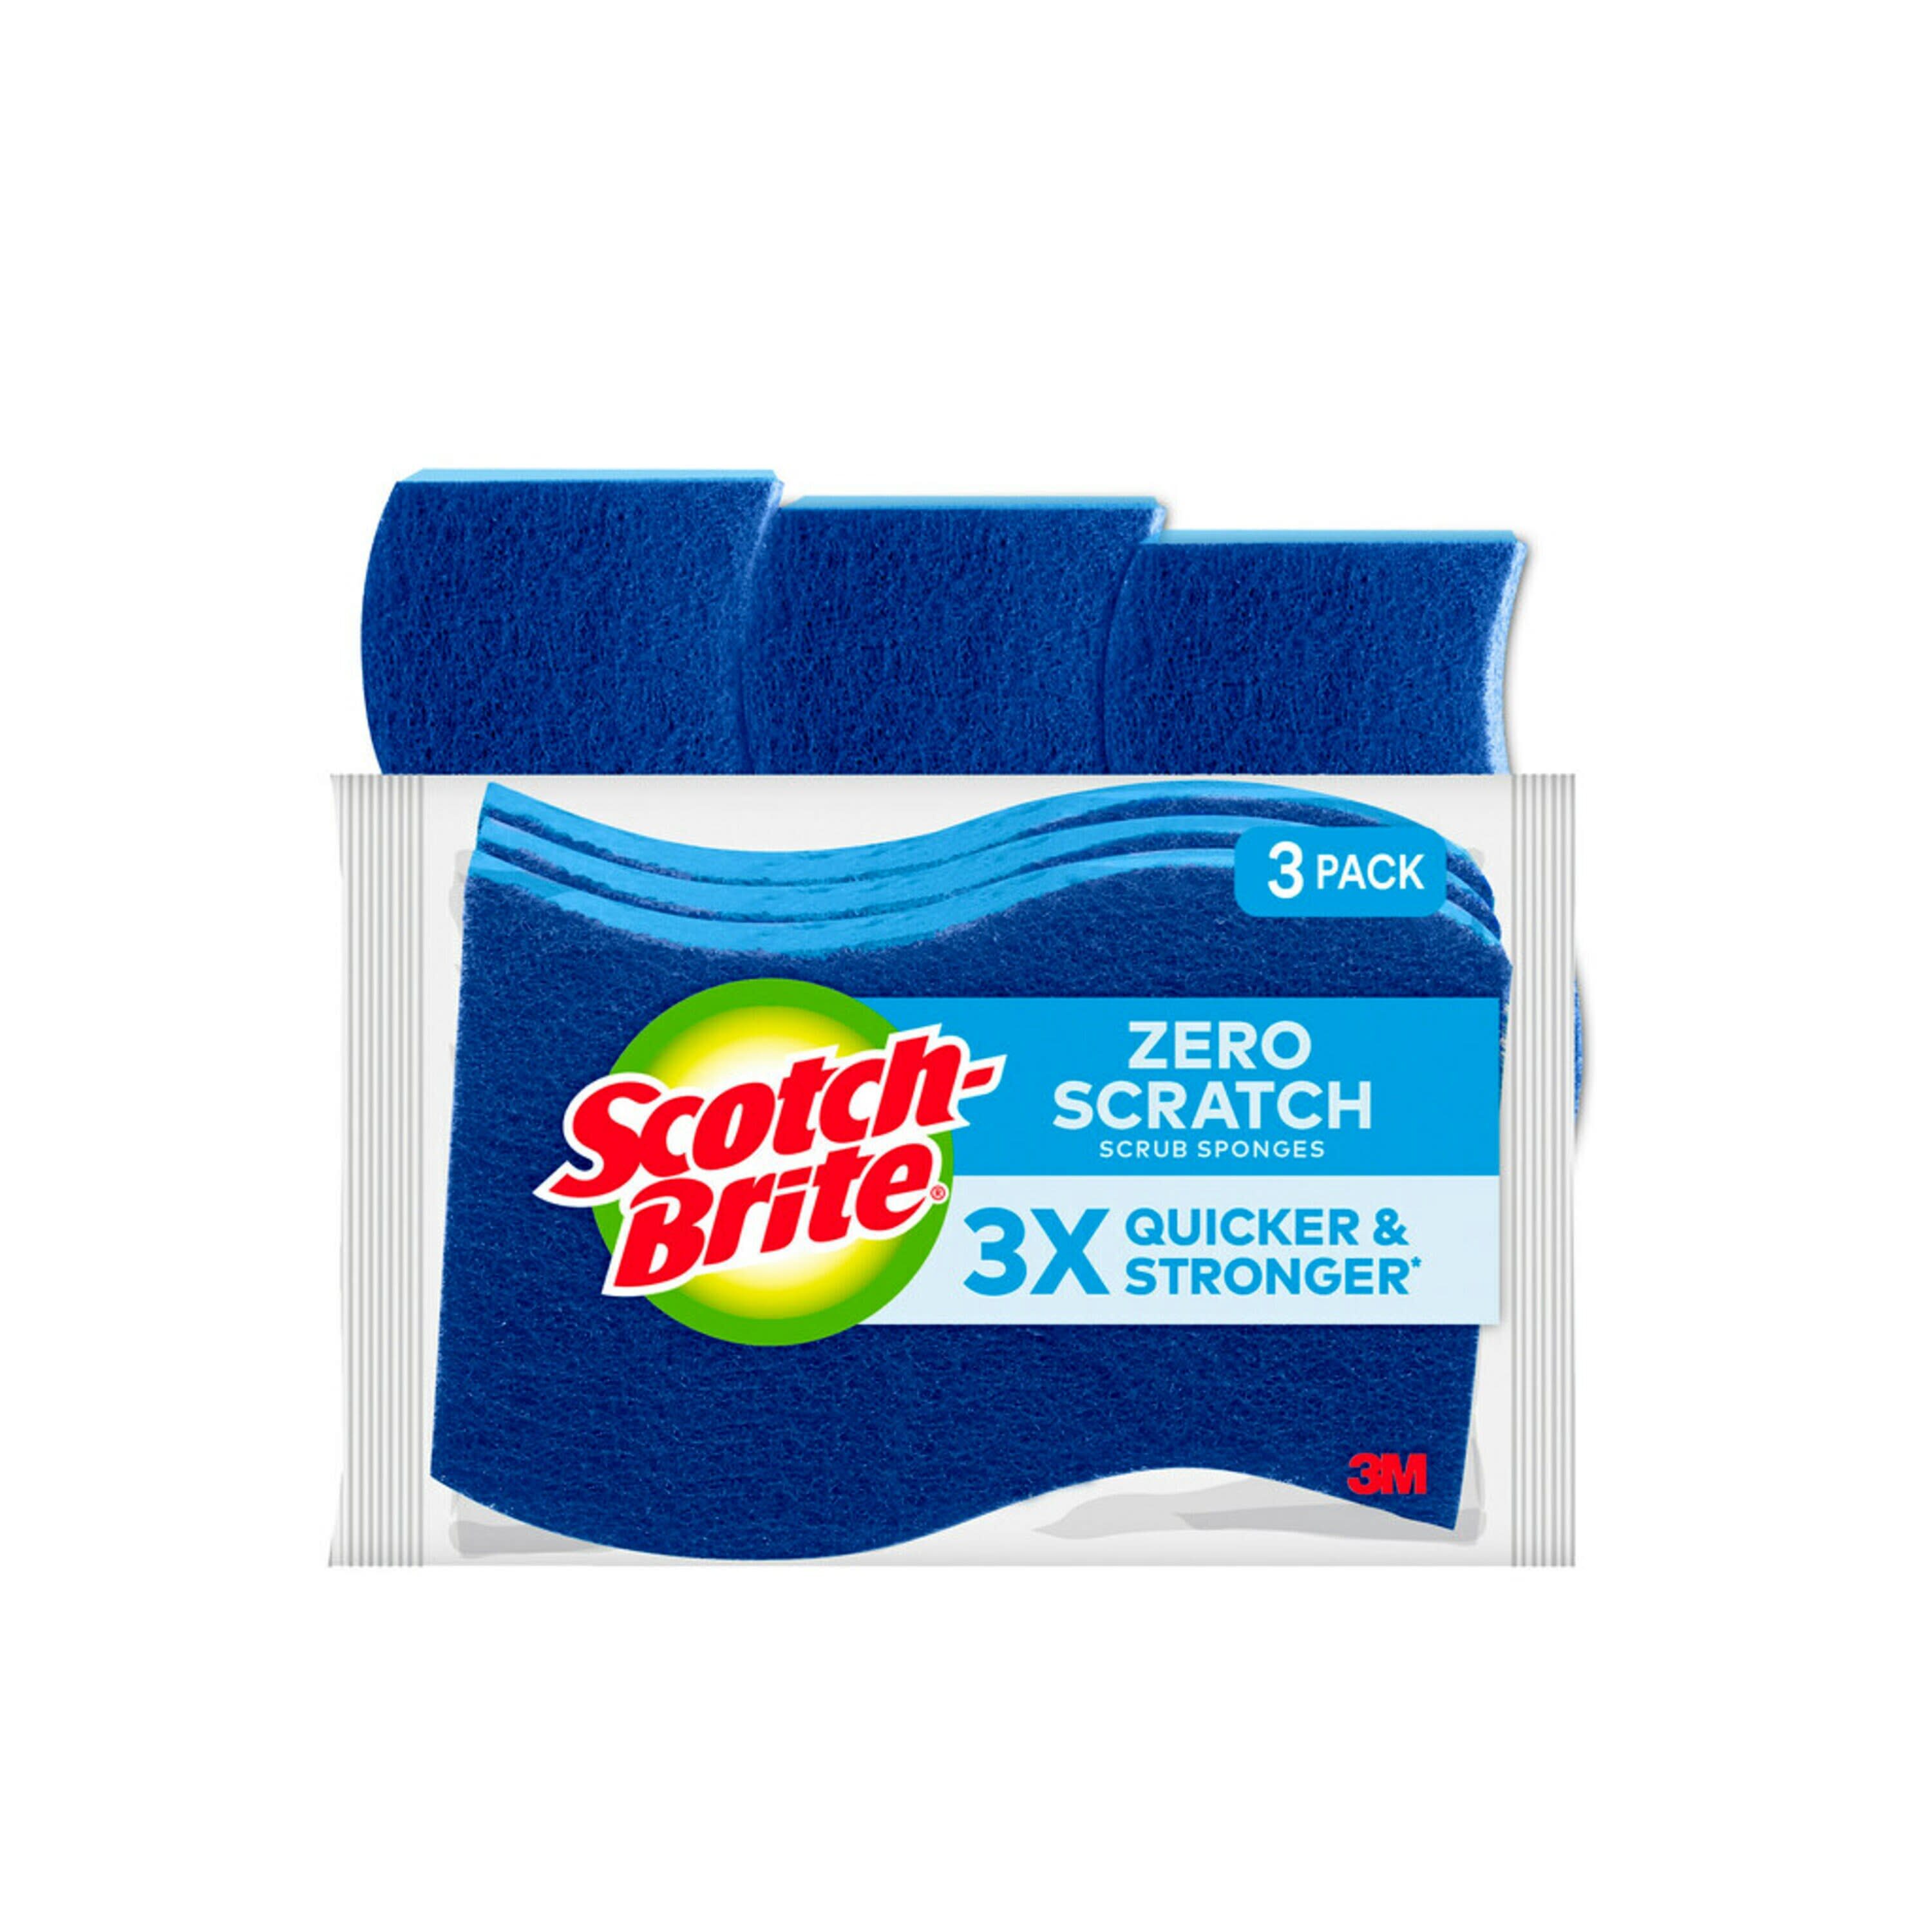 Scotch Brite Scrub Large 2+ Pack - 1 pcs avalaible for home delivery. 